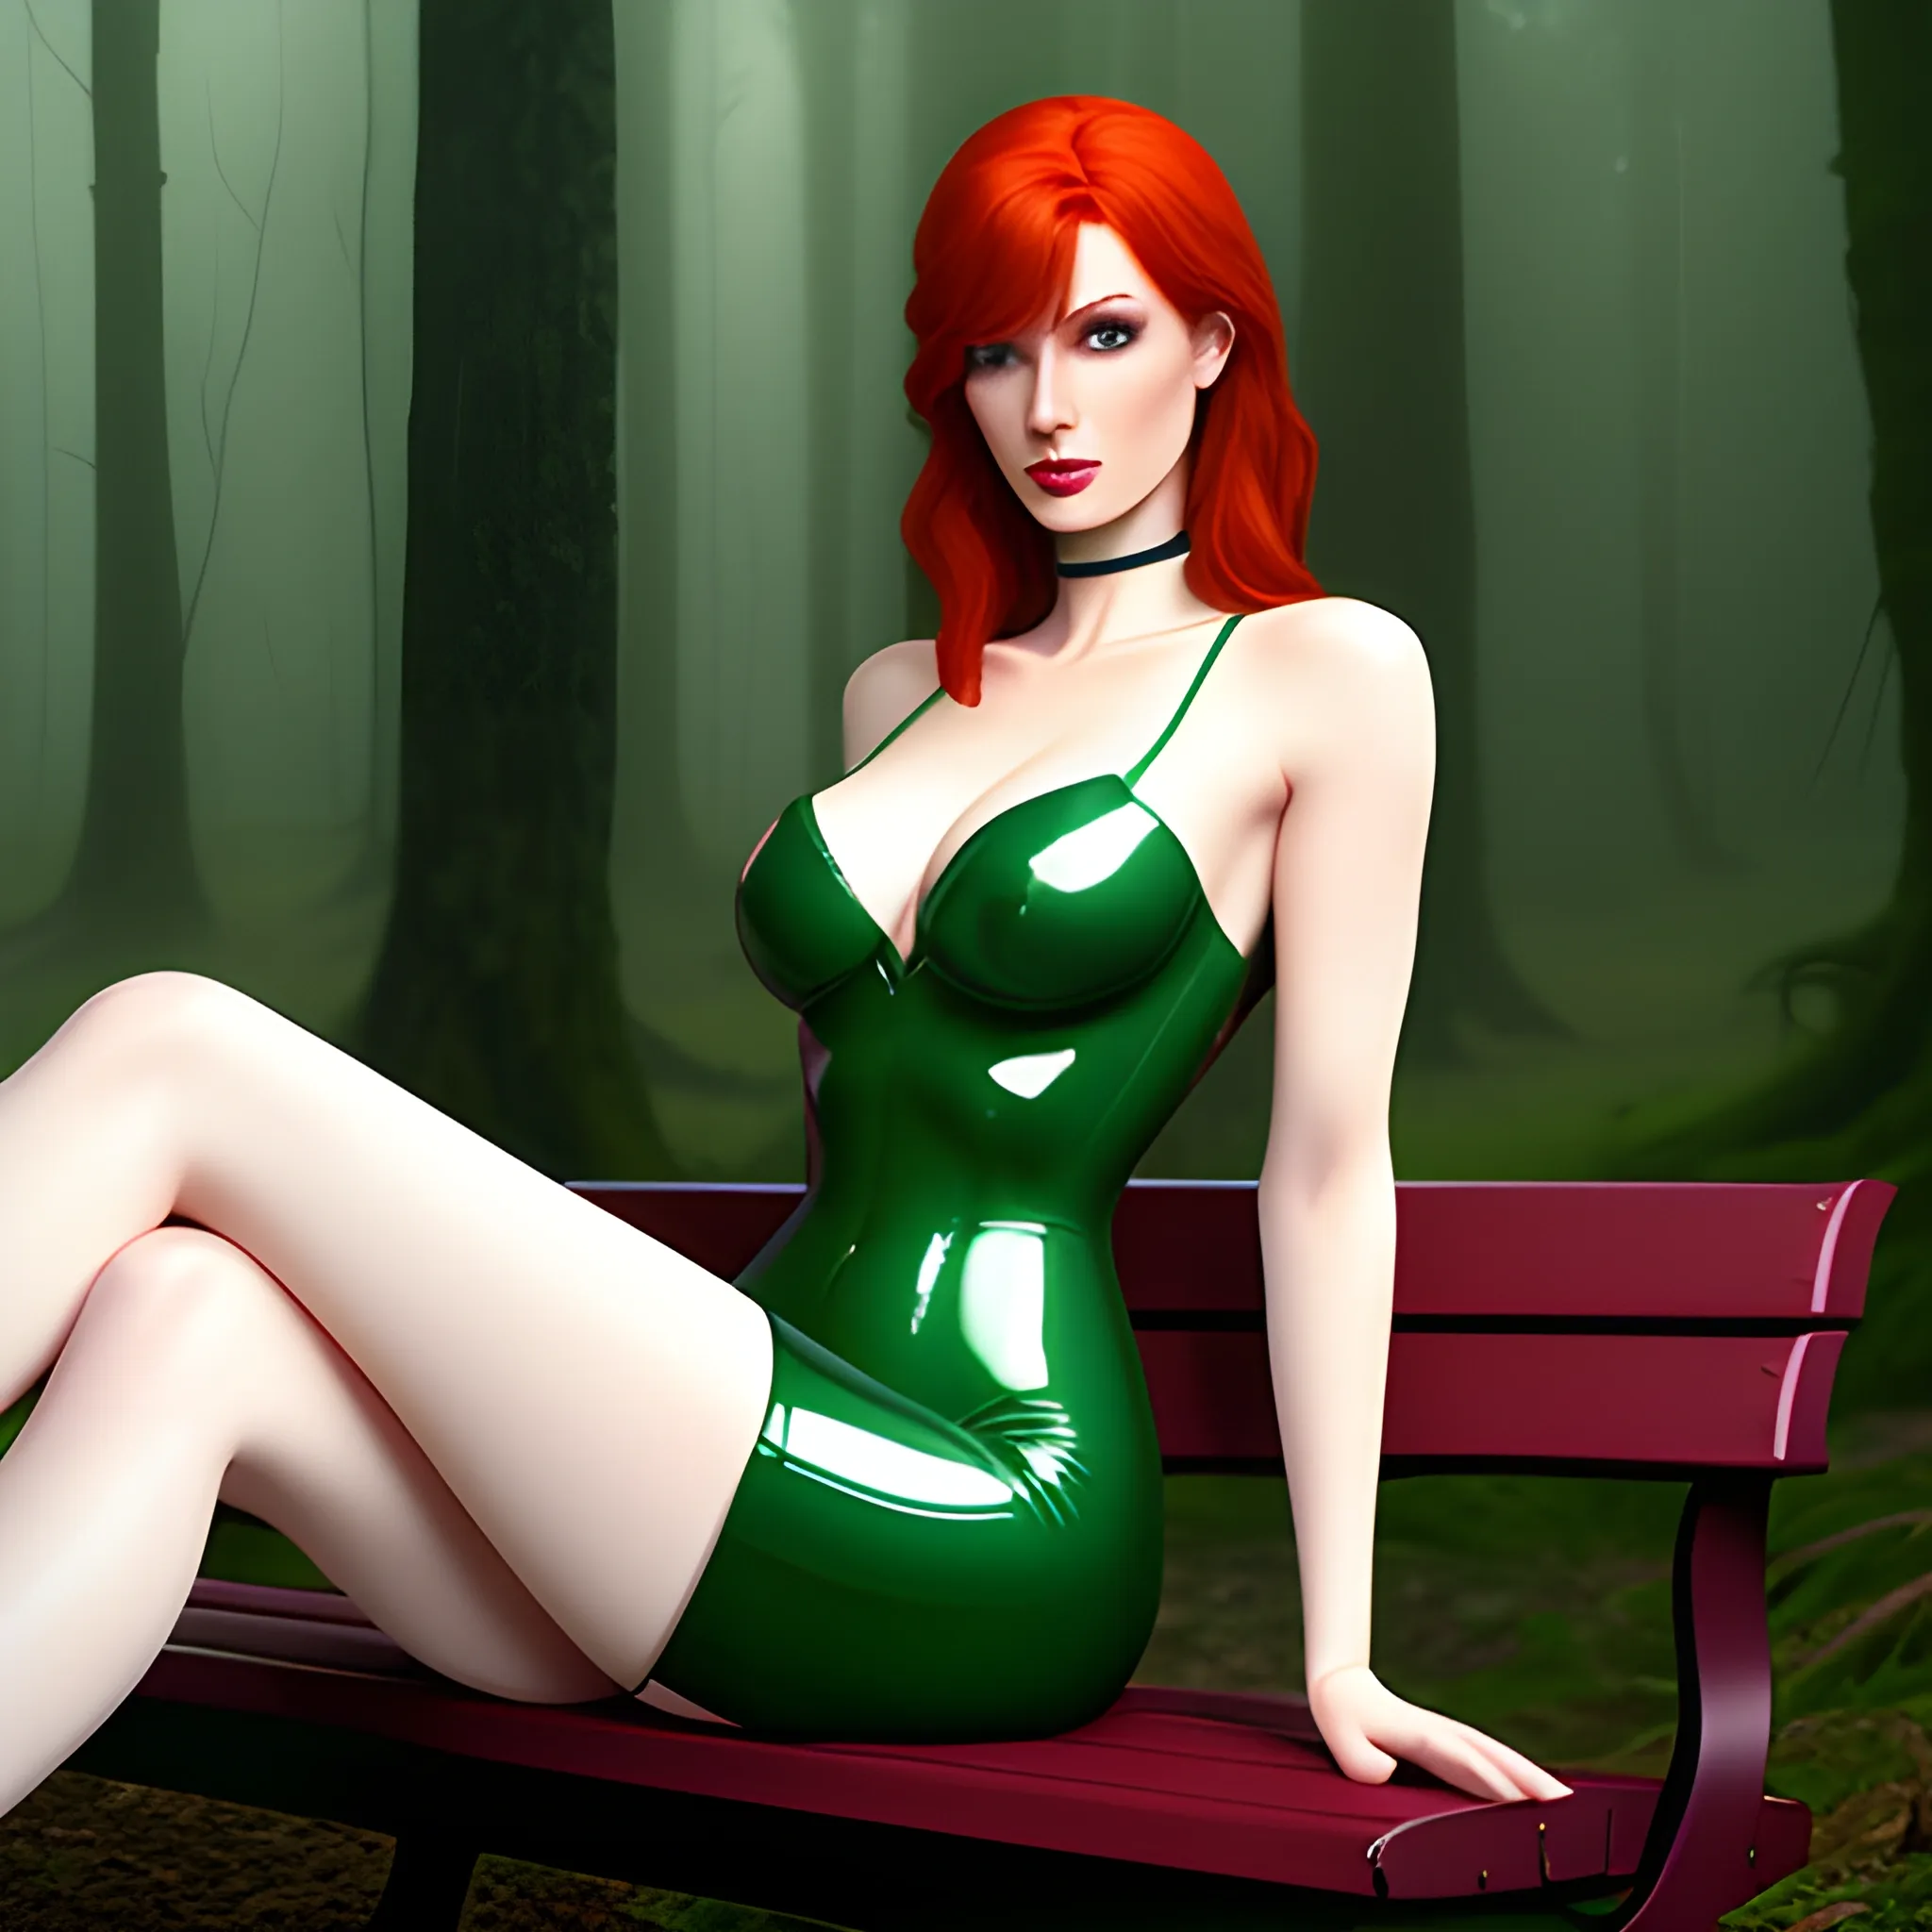 Create a photorealistic image of a young redhead woman with light green eyes and pale skin, wearing a dark red latex dress and sitting on a park bench. Chest visible, chest naked, whole body visible. In the background a gloomy forest in moonlight. High level of detail, Cartoon